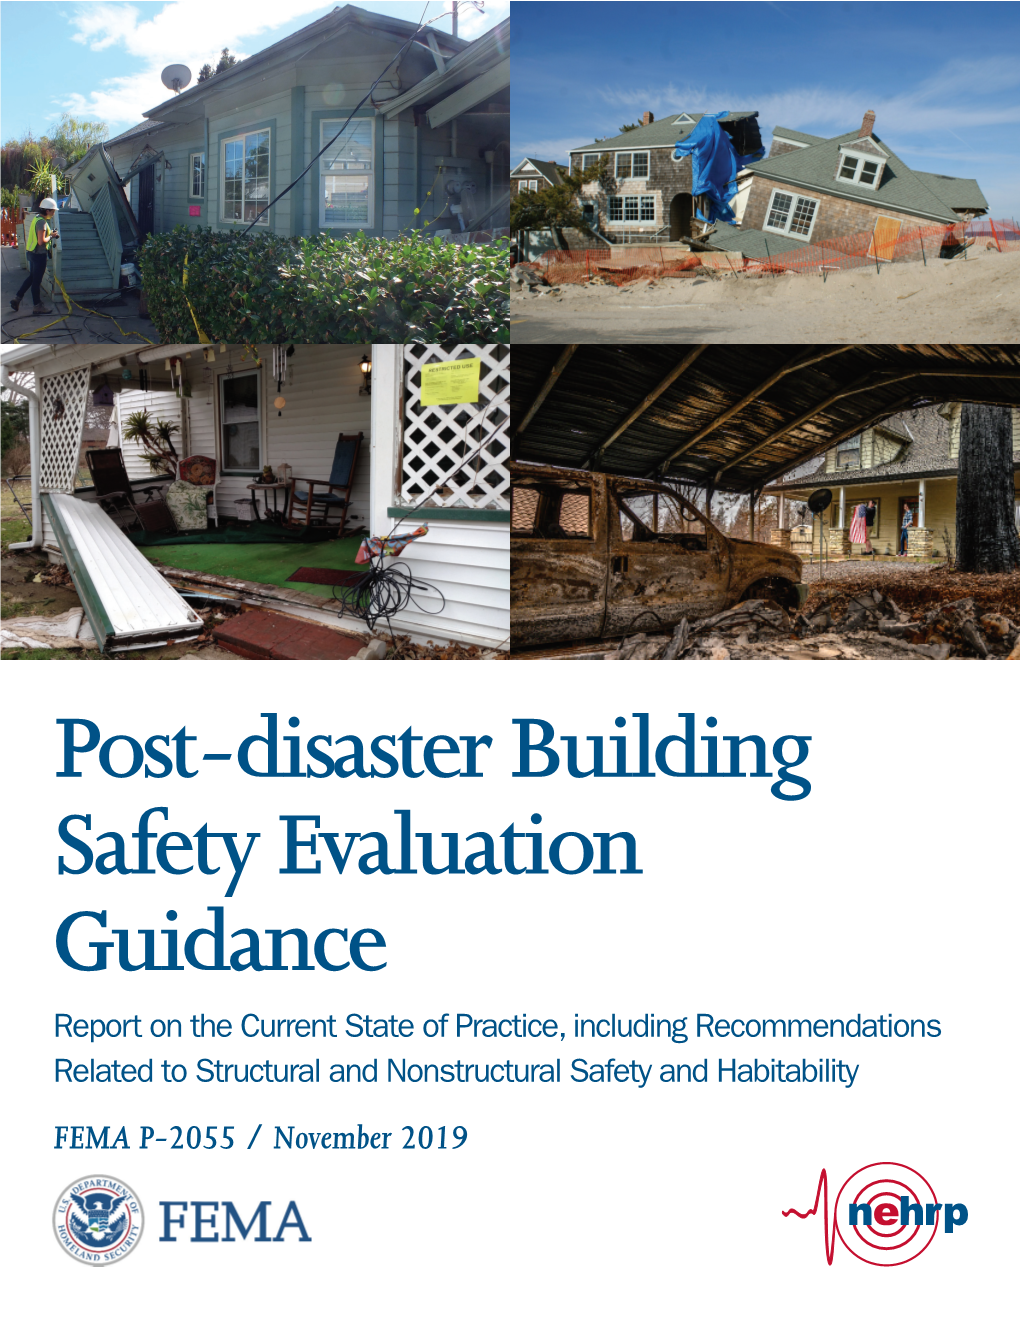 FEMA P-2055, Post-Disaster Building Safety Evaluation Guidance